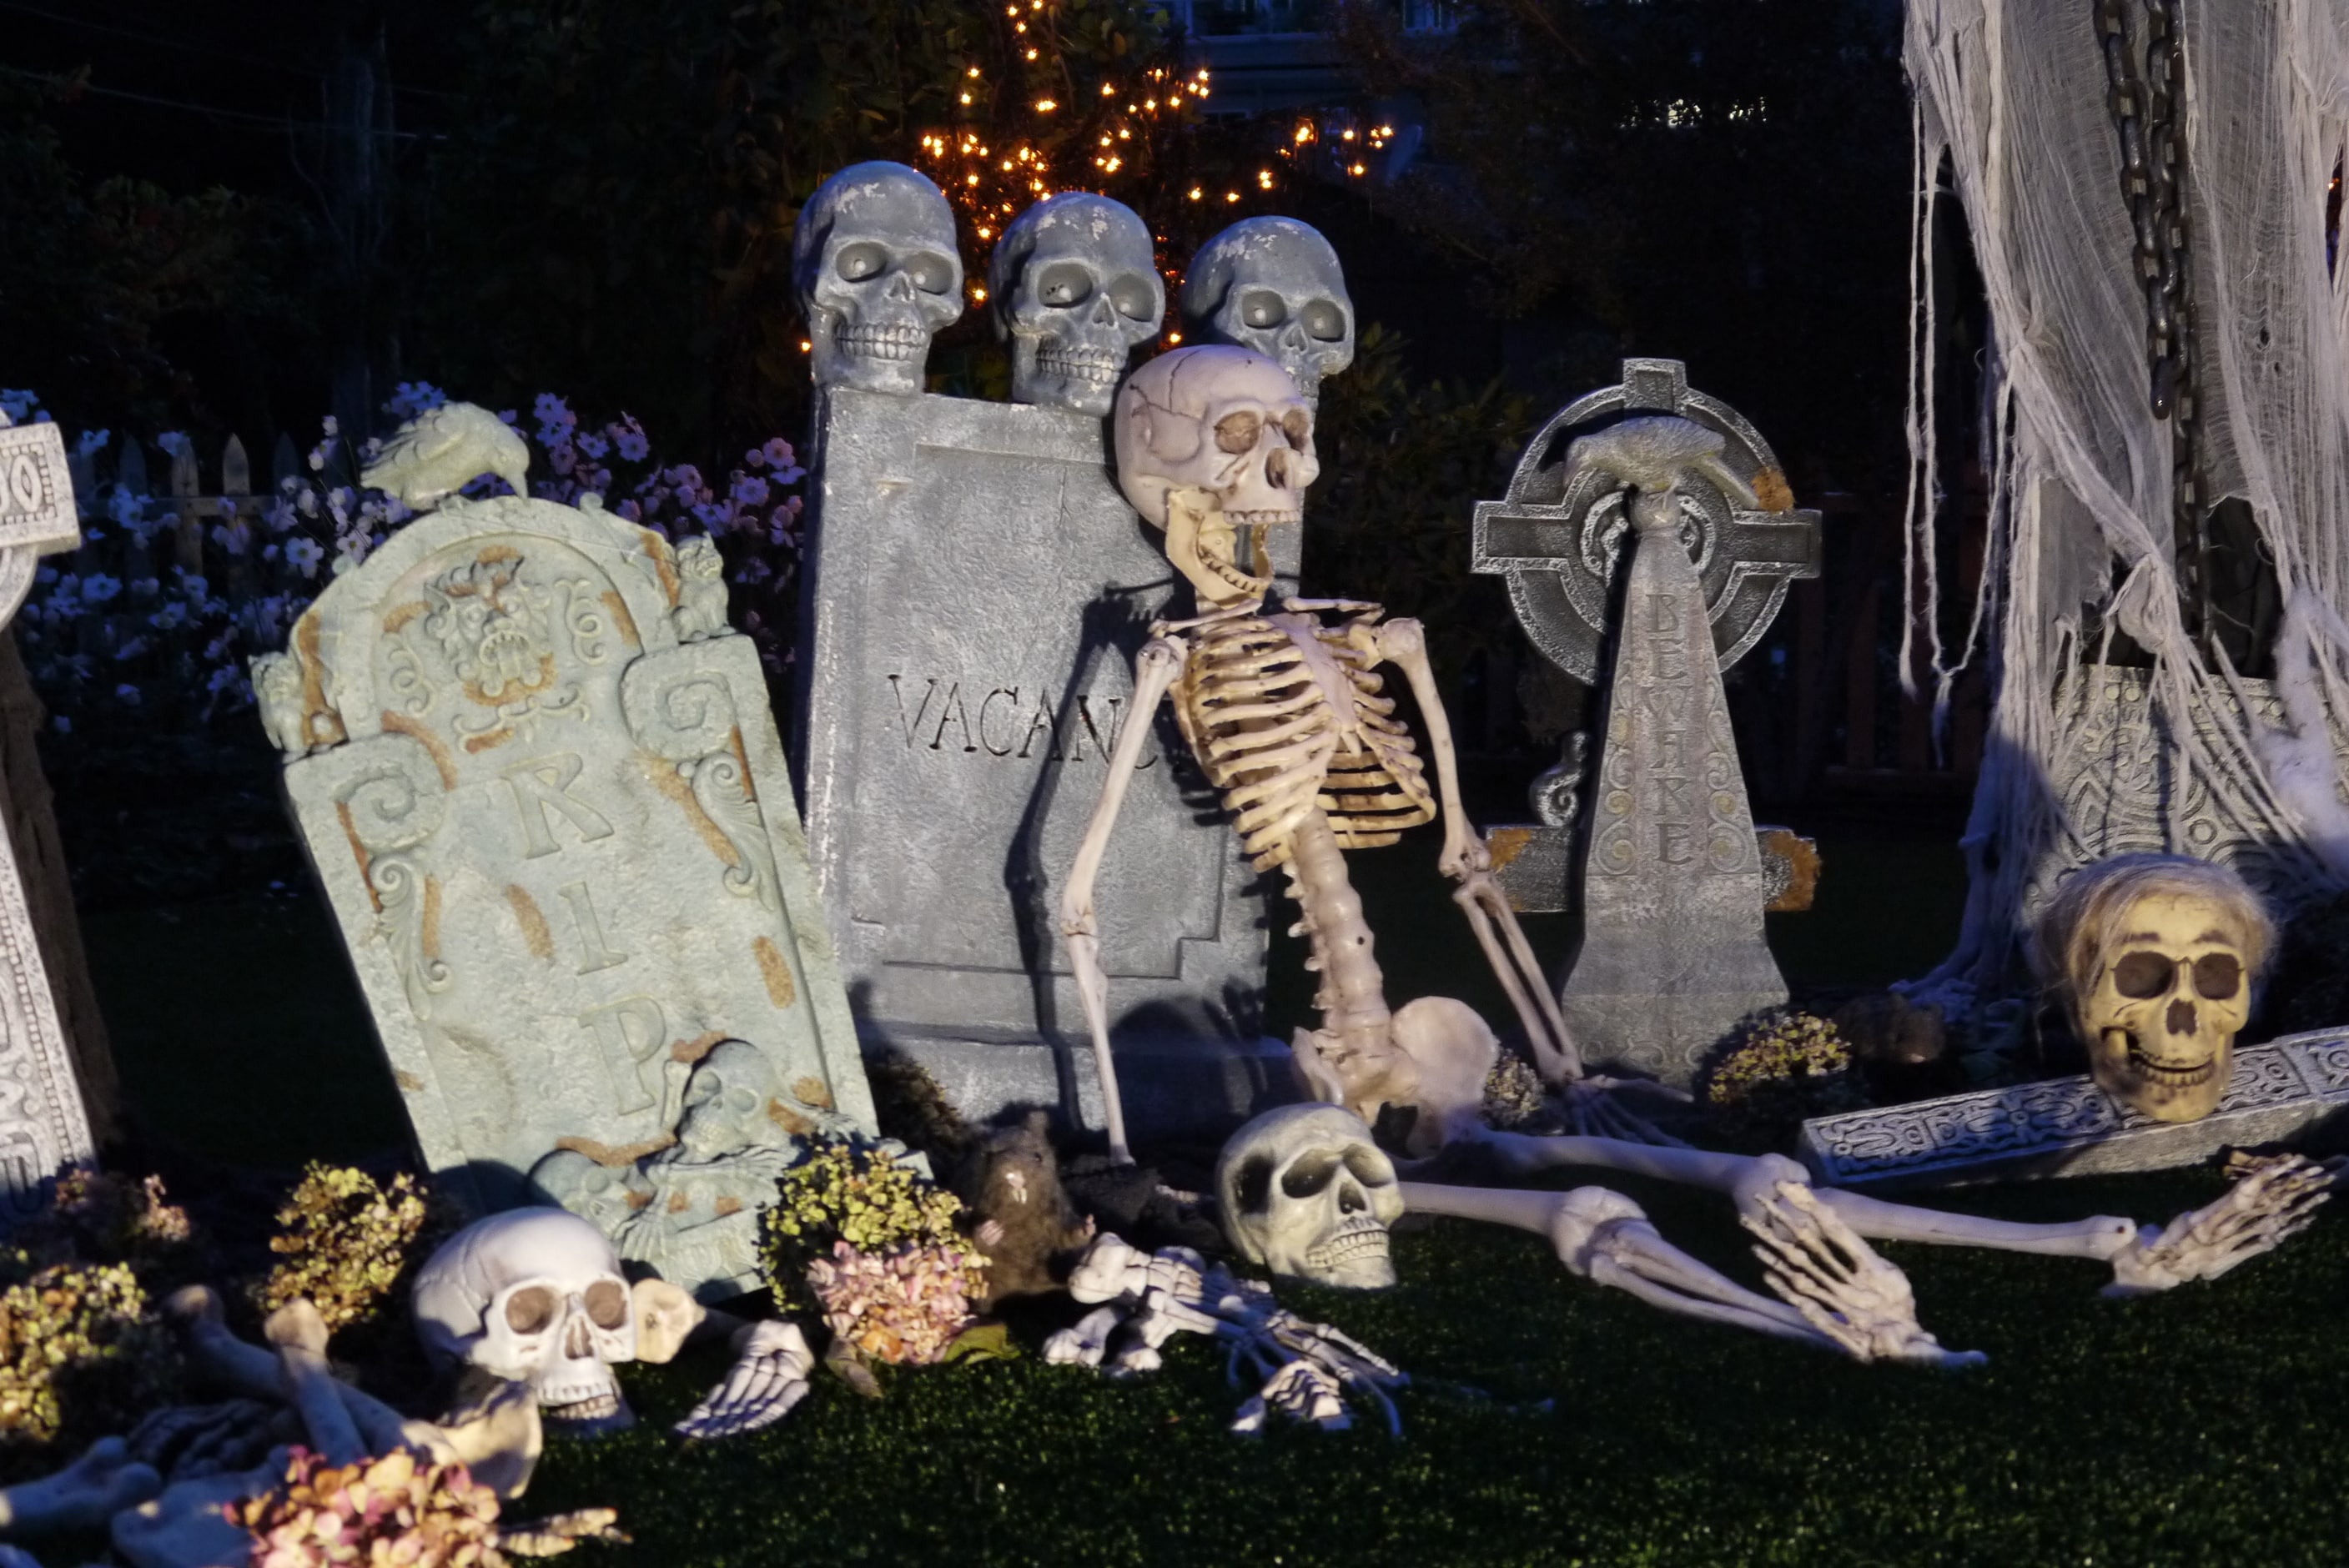 halloween decor skeletons leaning up against decorative tombstones in a graveyard scene at night